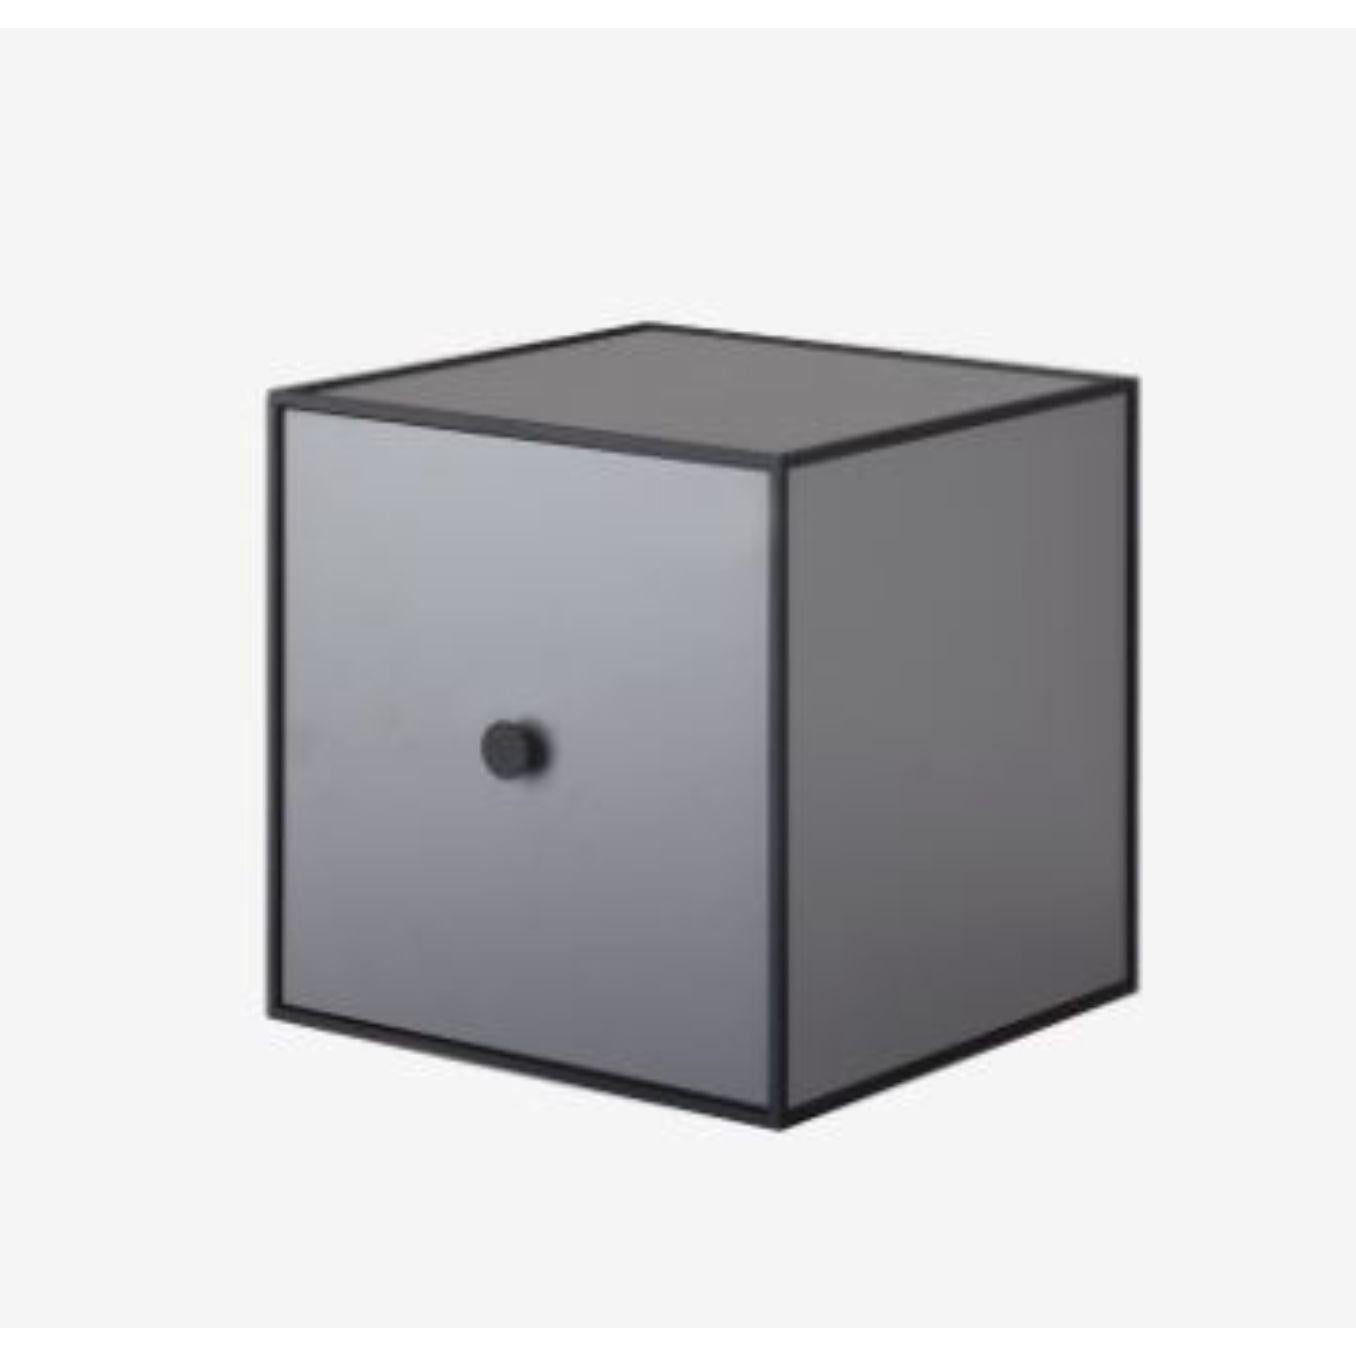 35 Dark grey frame box with door by Lassen
Dimensions: W 35 x D 35 x H 35 cm 
Materials: Finér, Melamin, Melamin, Melamine, metal, veneer
Also available in different colours and dimensions.

By Lassen is a Danish design brand focused on iconic